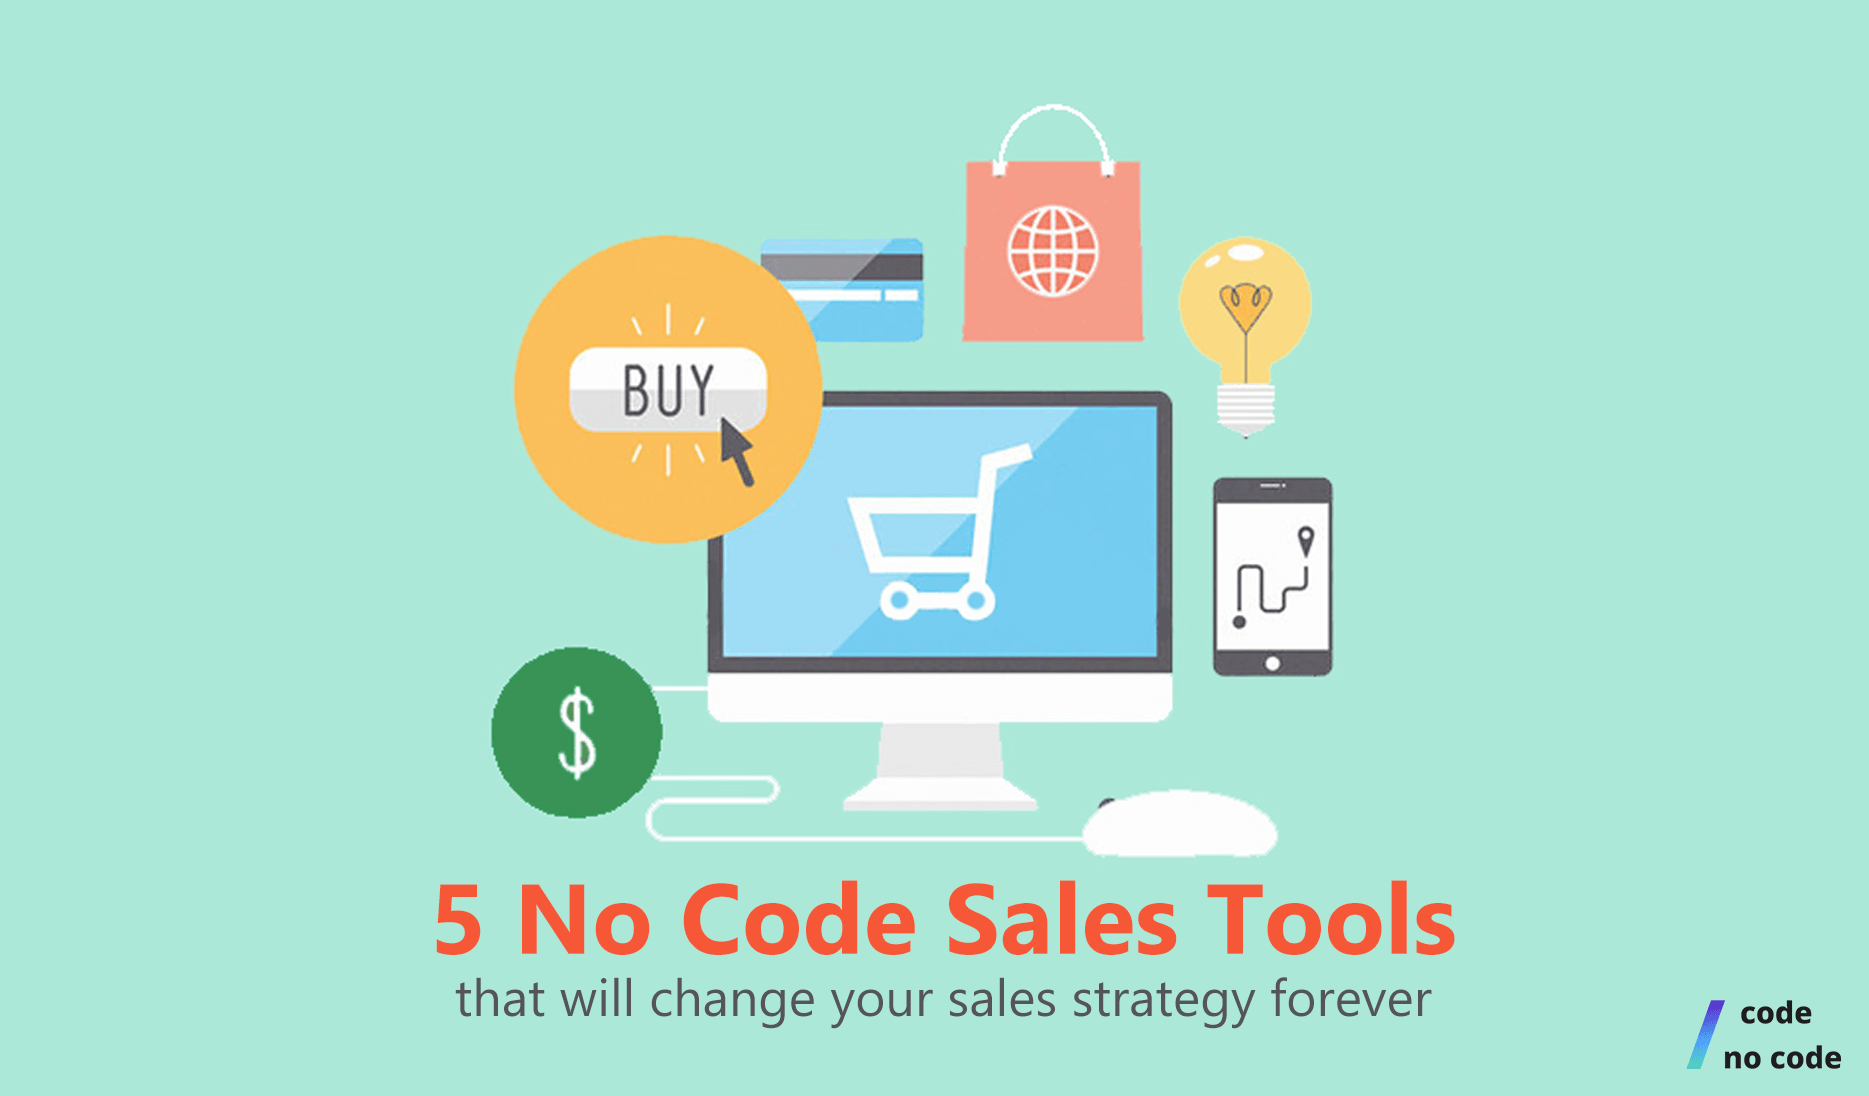 5 No code sales tools that will change your sales strategy forever